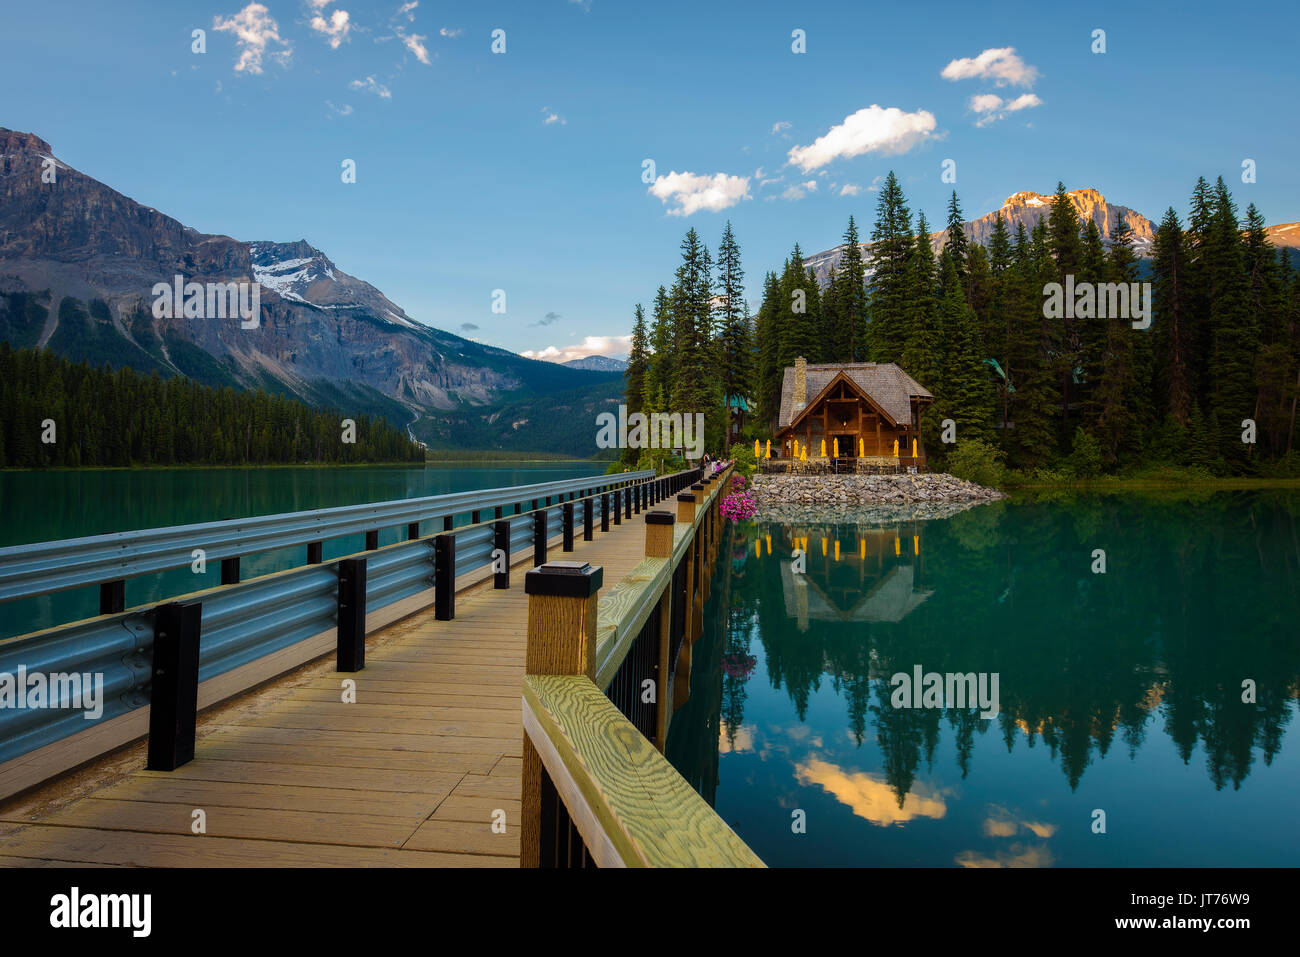 Emerald Lake Lodge with a restaurant in Yoho National Park, British Columbia, Canada. Stock Photo